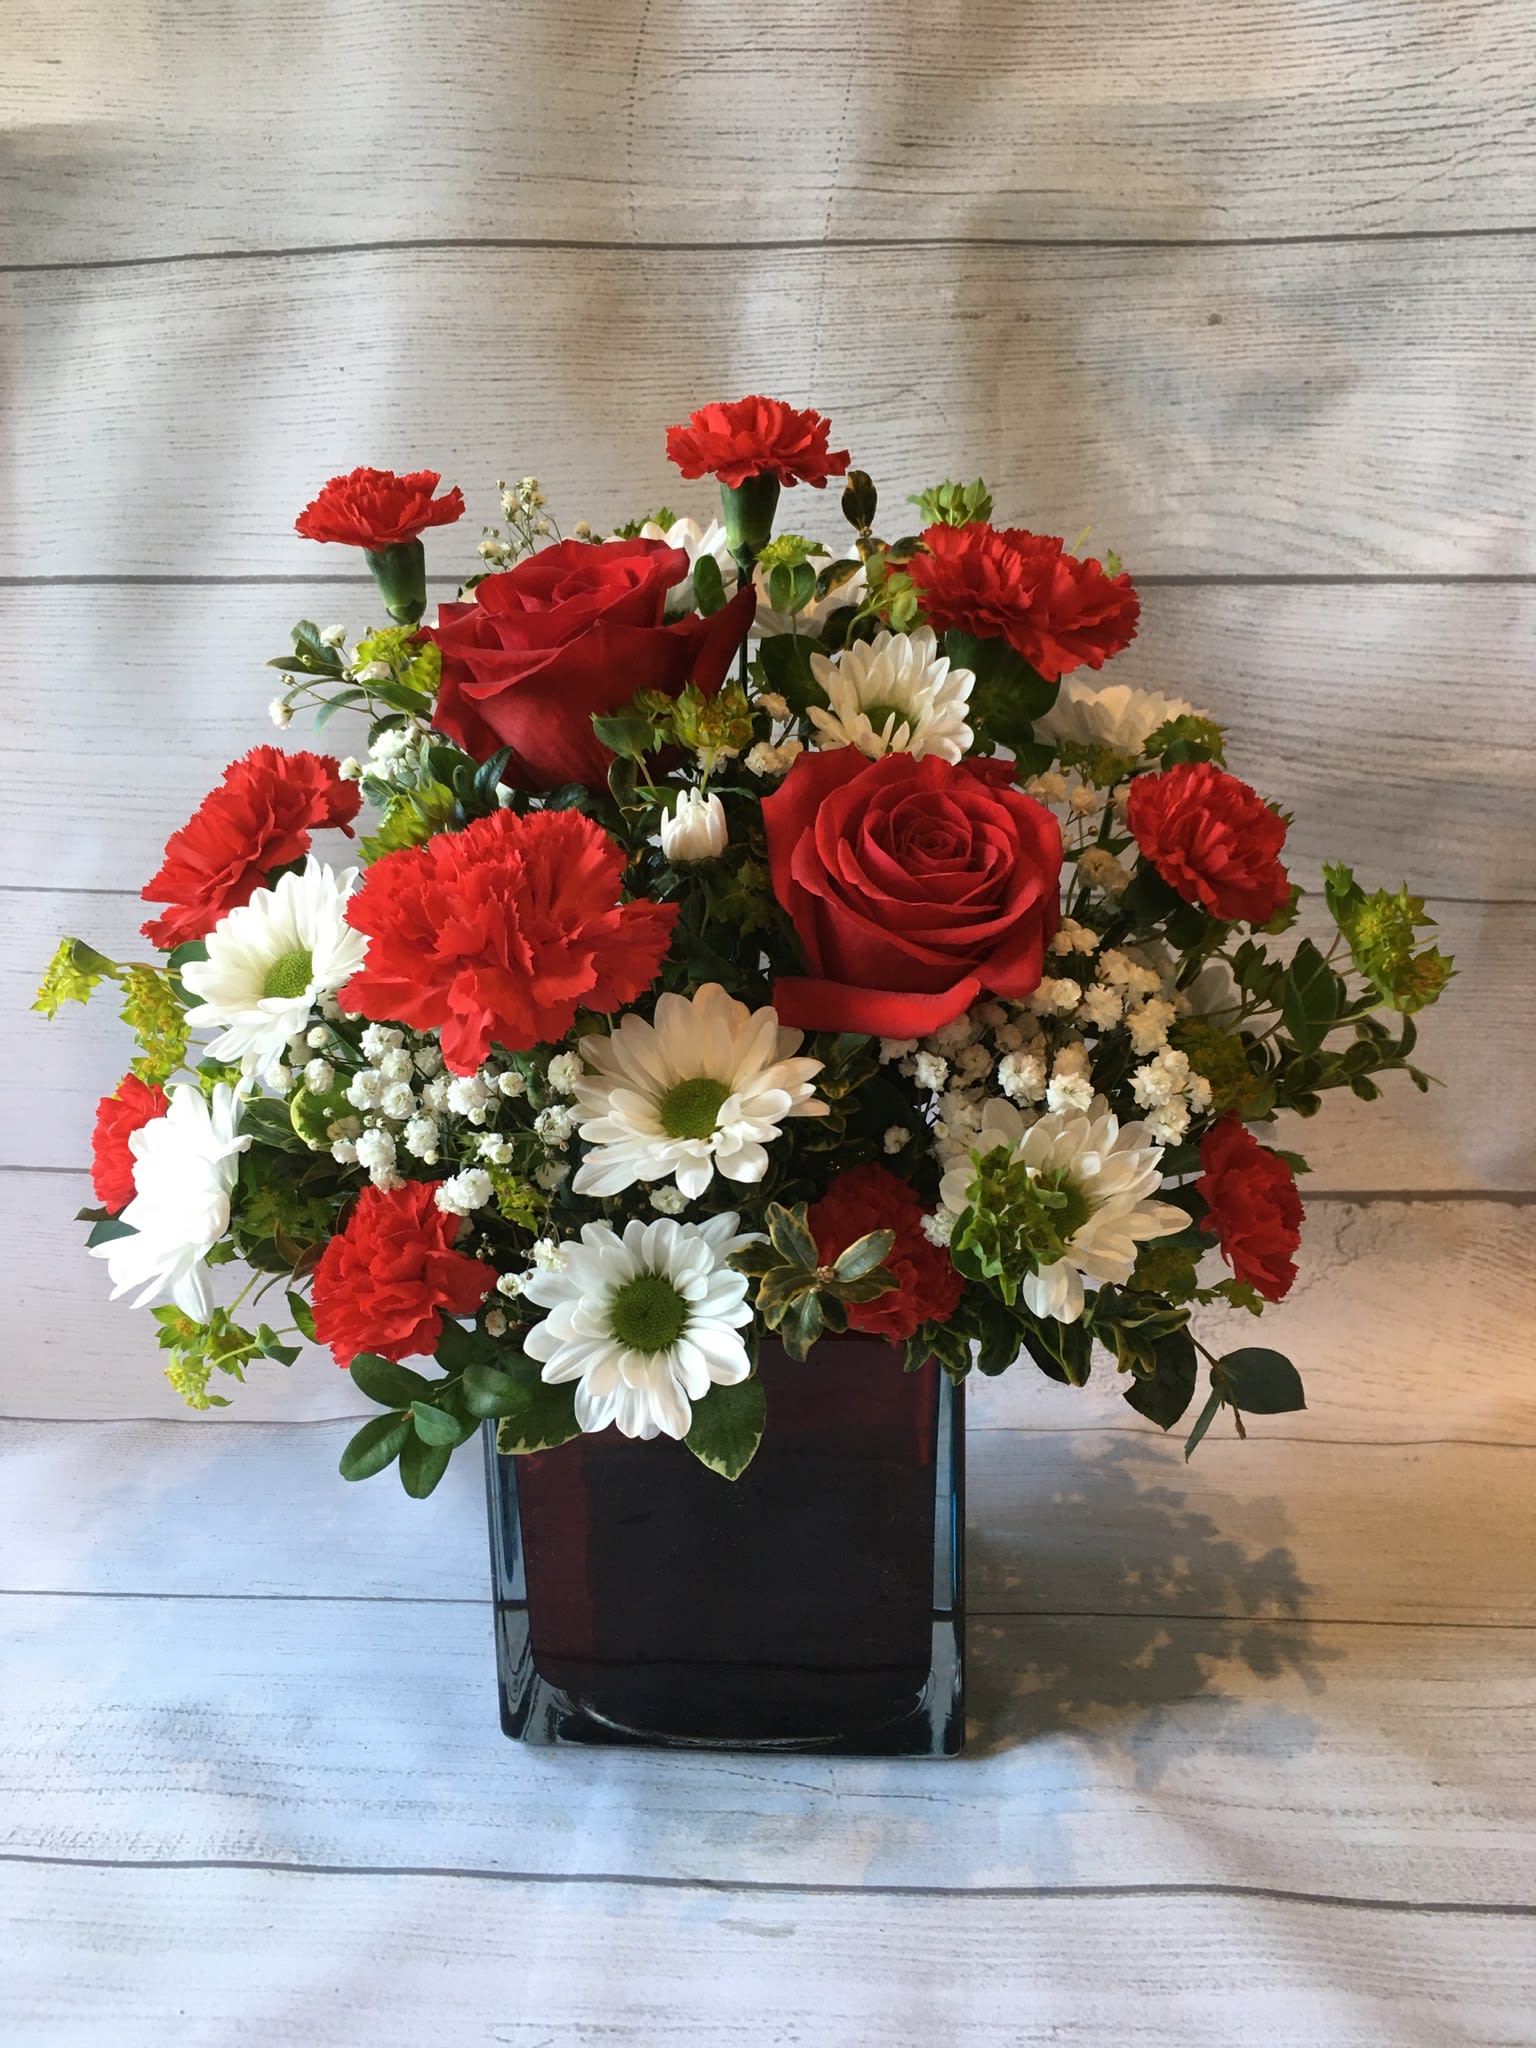 Simply delightful - An abundance of red and white flowers arranged in a red cube is a beautiful gift for any occasion 